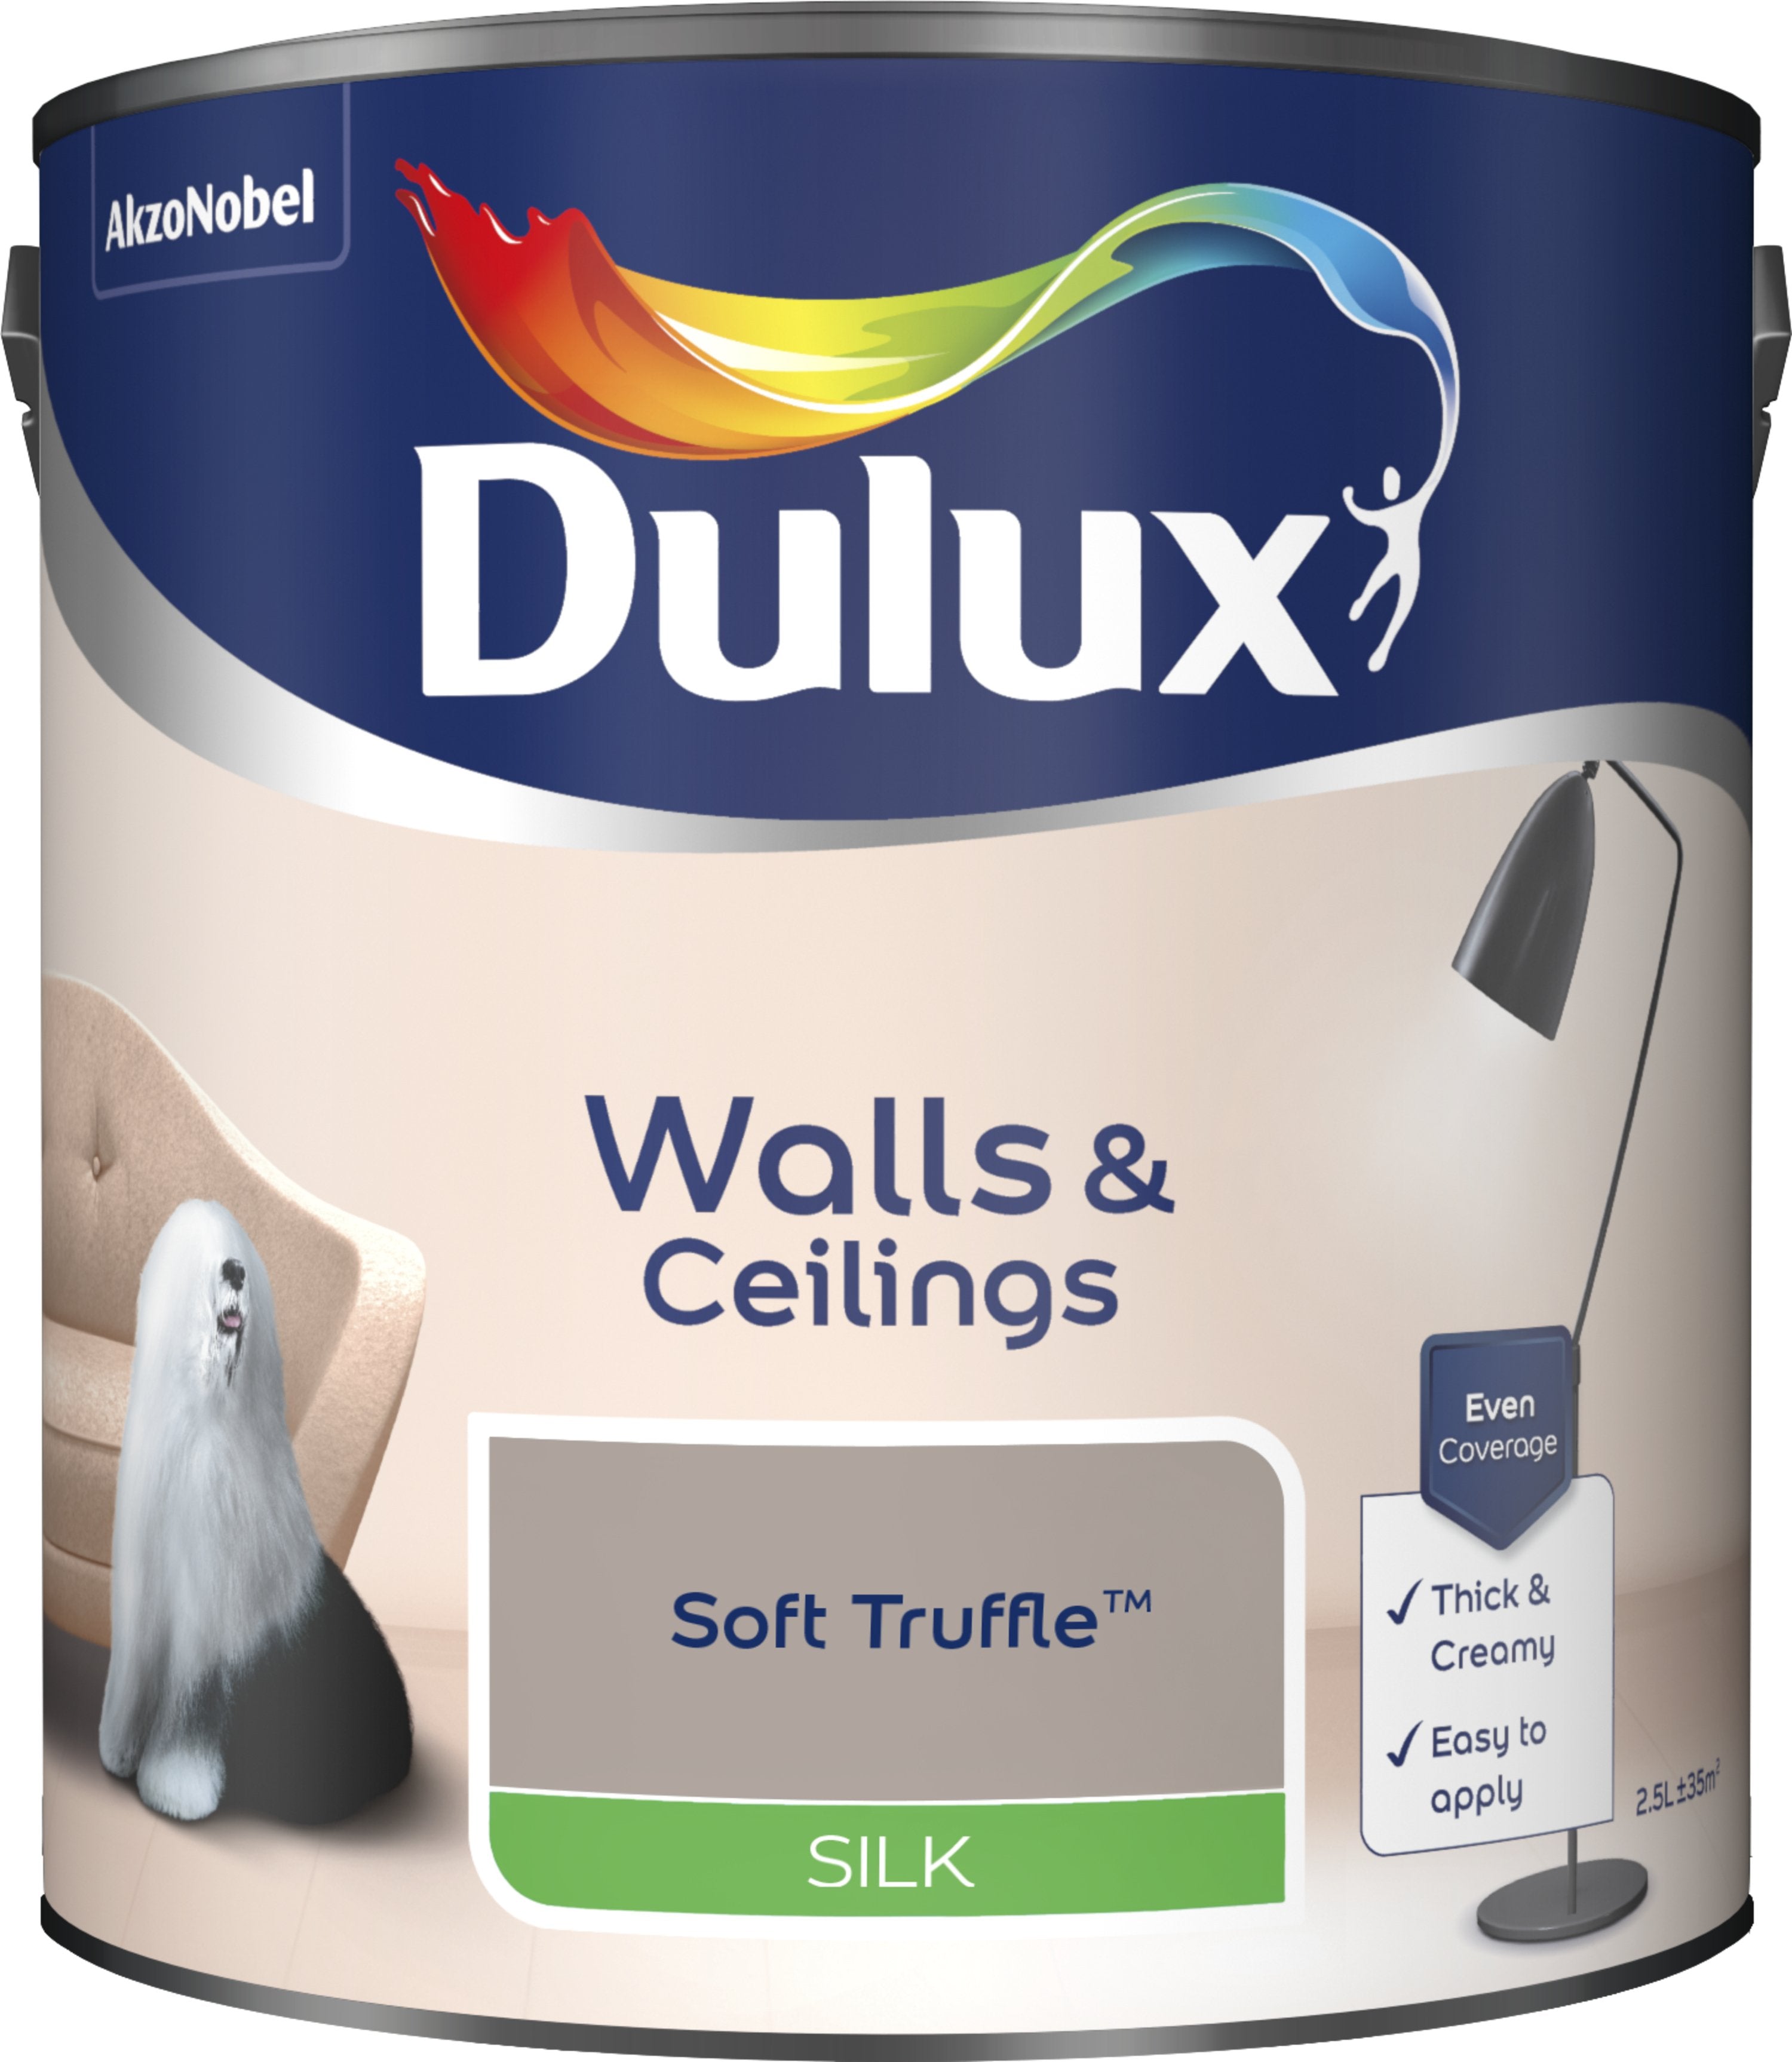 Dulux Silk Emulsion Paint For Walls And Ceilings - Soft Truffle 2.5L Garden & Diy  Home Improvements